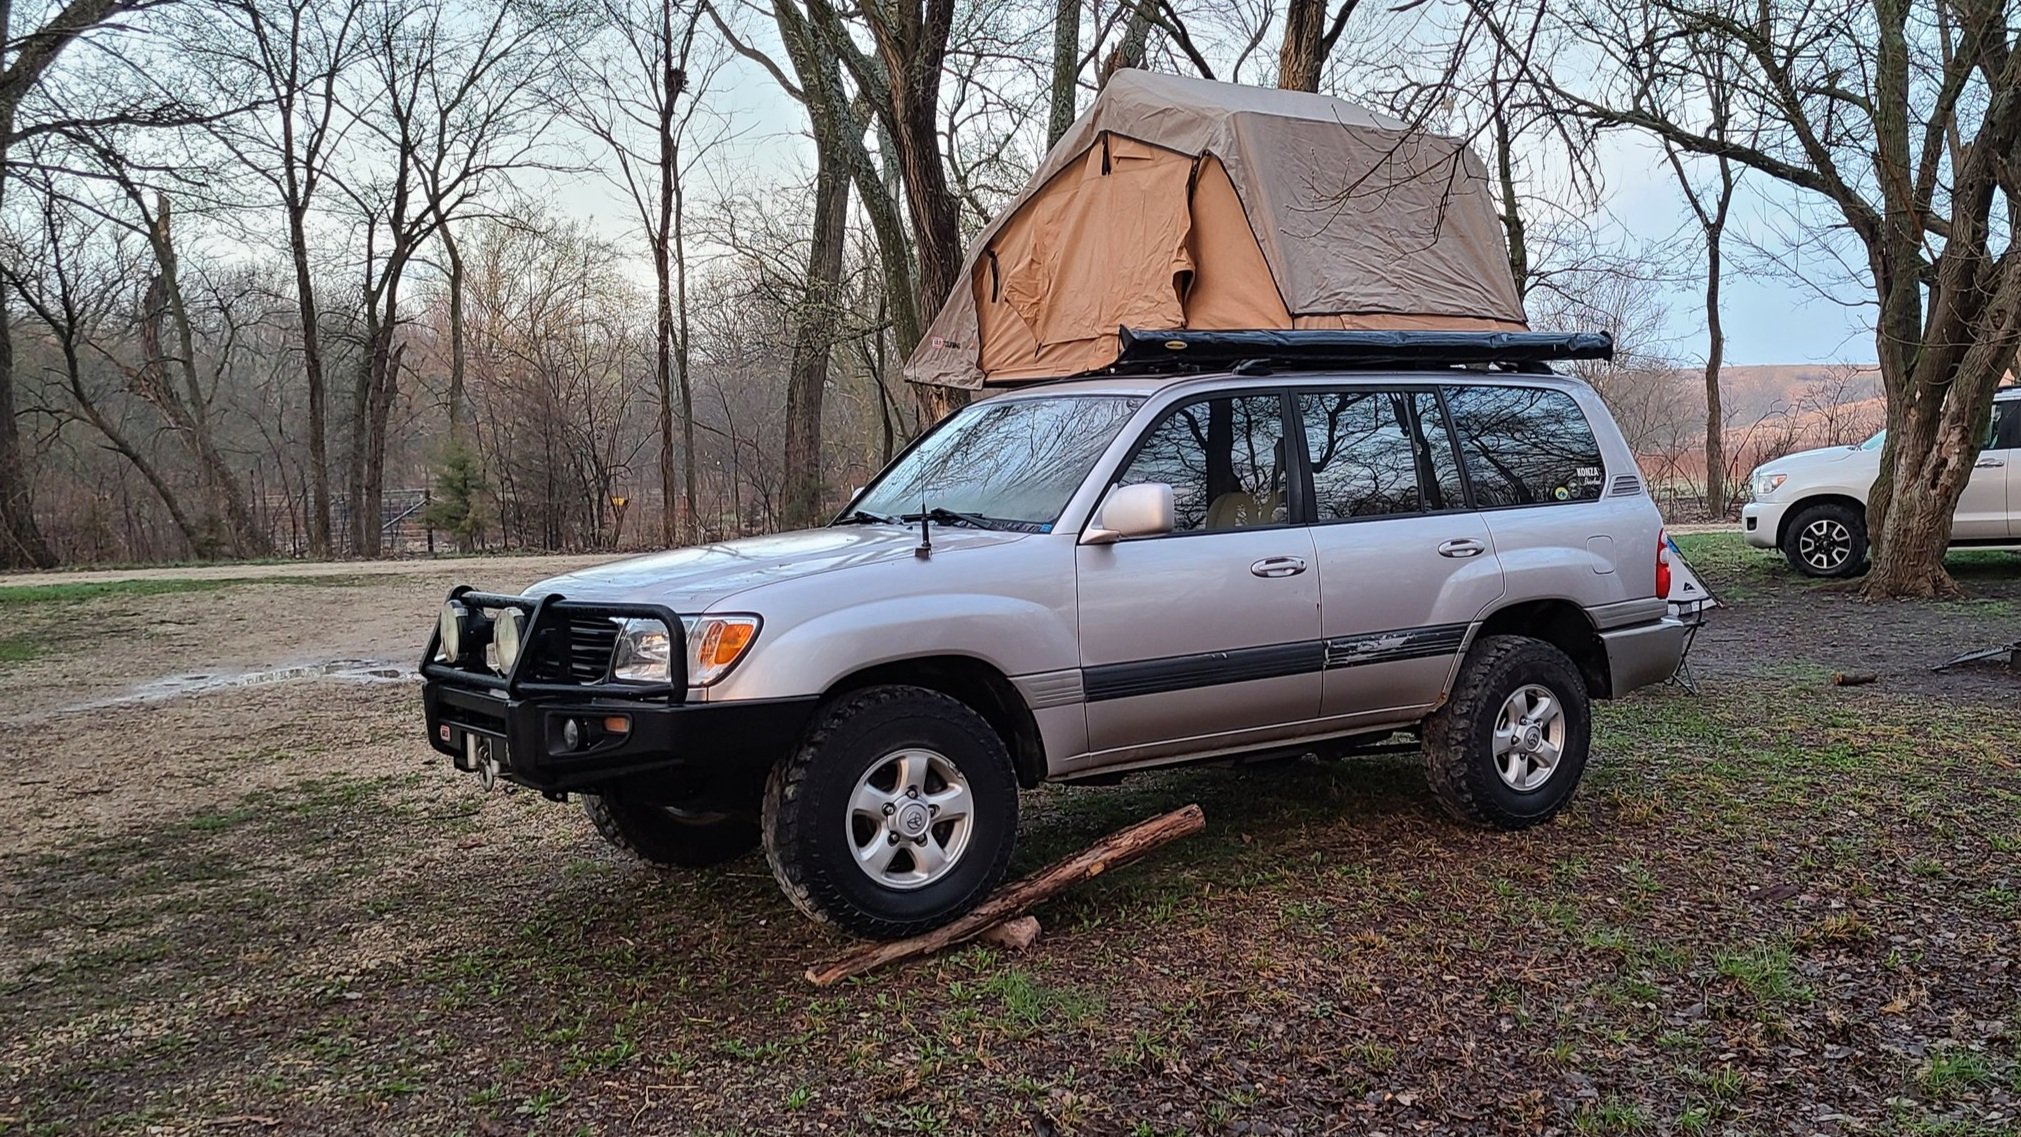 Toyota Land Cruiser - 11 Best Overland Vehicles: The Ultimate Guide